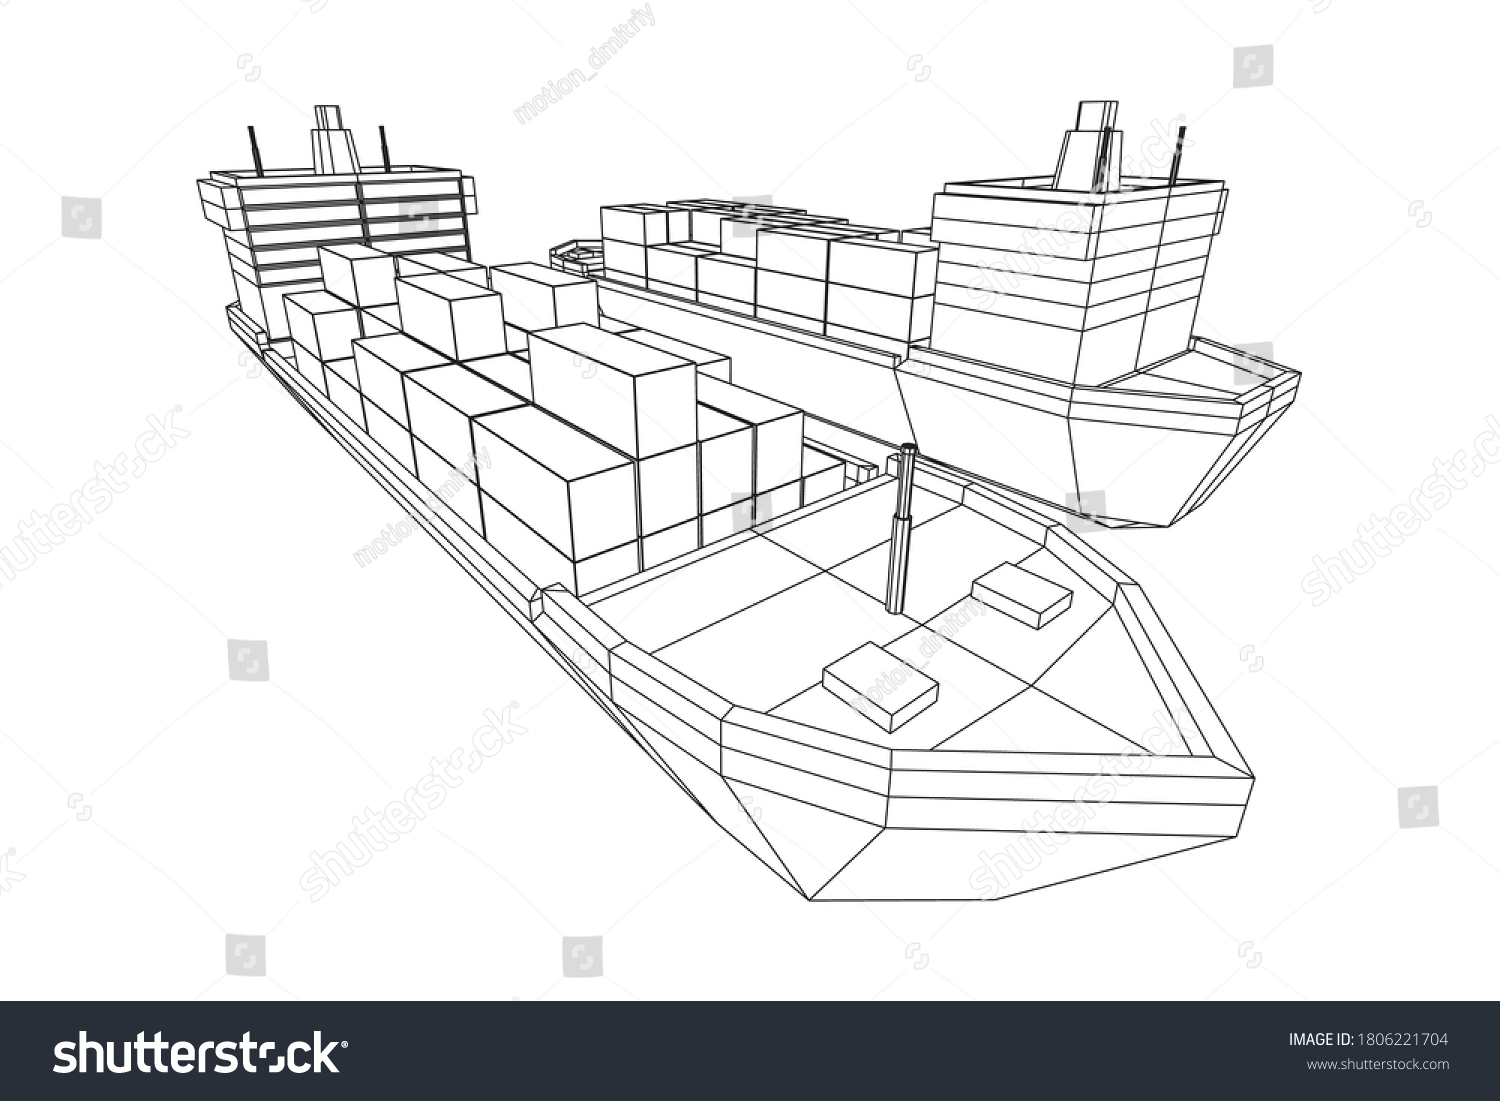 SVG of Heavy dry cargo ship of bulk carrier with freight containers. Wireframe low poly mesh vector illustration. svg